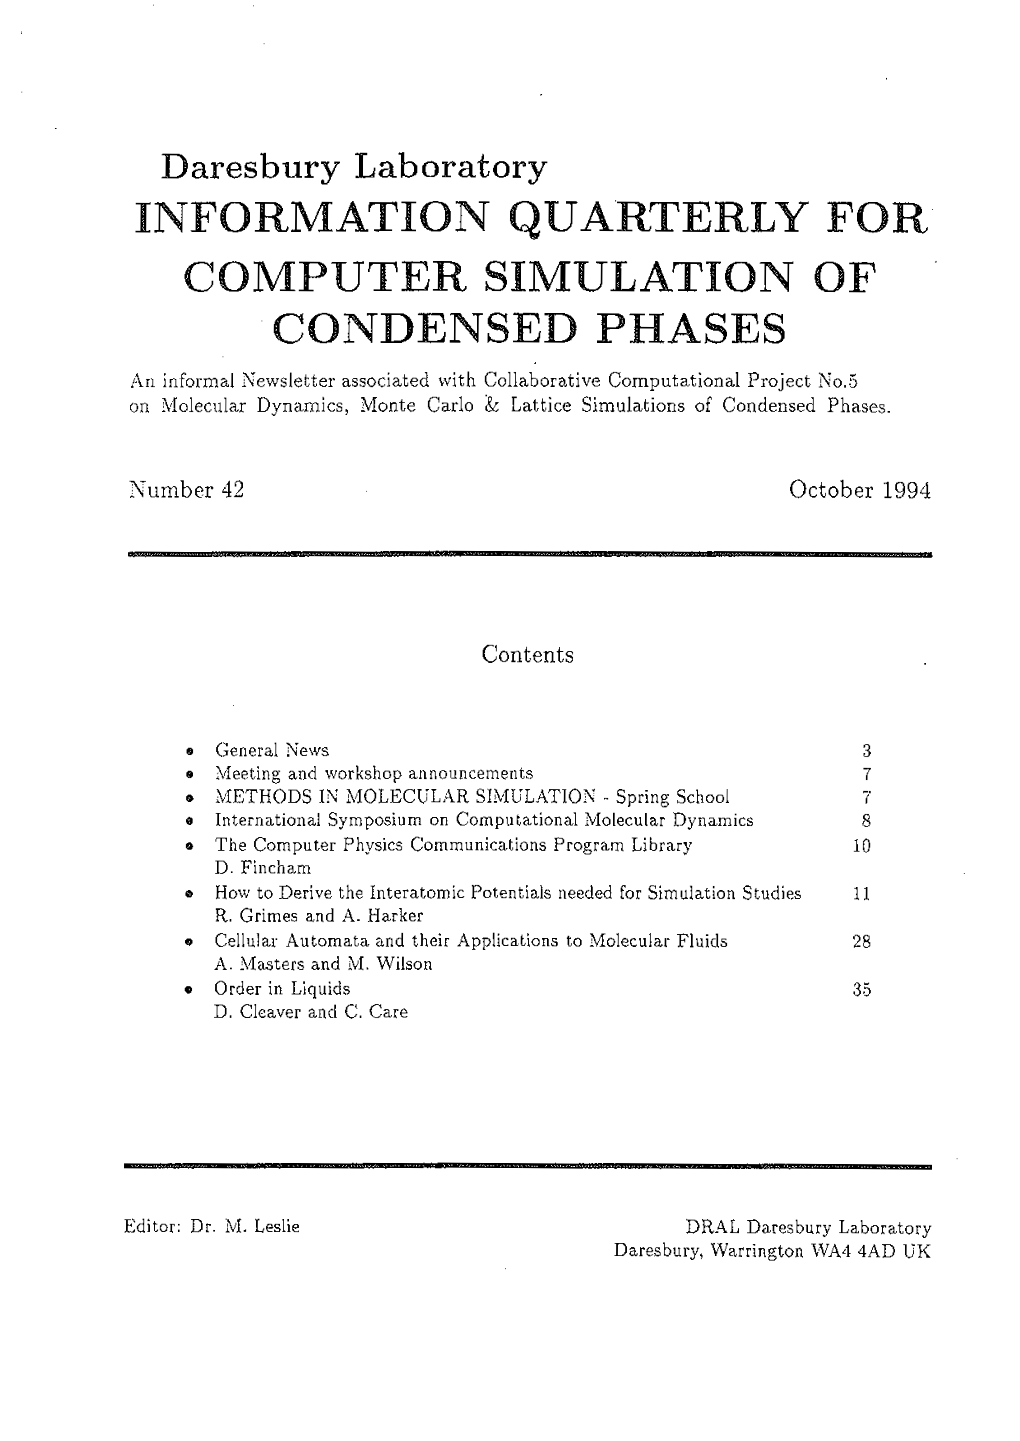 Information Quarterly for Computer Simulation Of